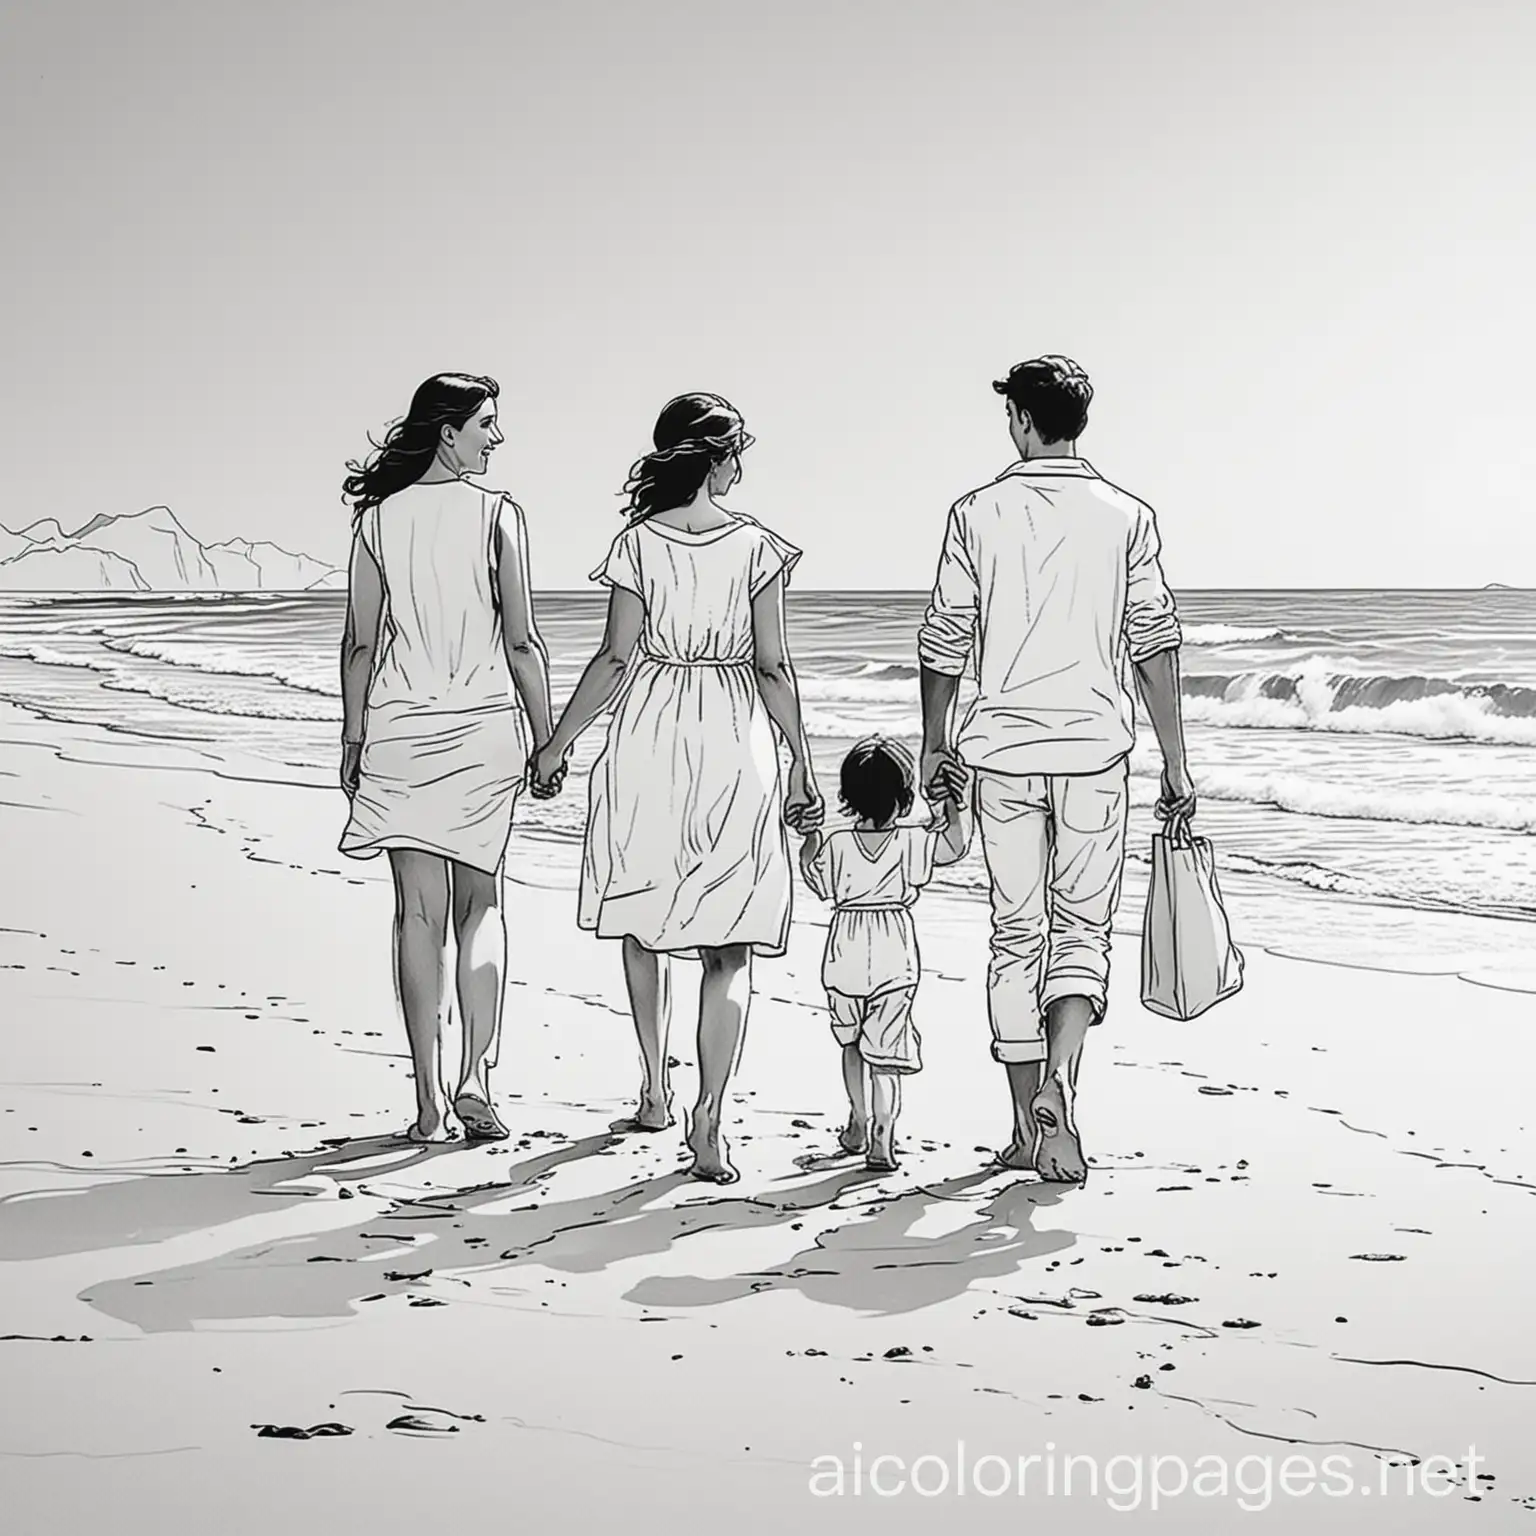 familia paseando por la playa
, Coloring Page, black and white, line art, white background, Simplicity, Ample White Space. The background of the coloring page is plain white to make it easy for young children to color within the lines. The outlines of all the subjects are easy to distinguish, making it simple for kids to color without too much difficulty